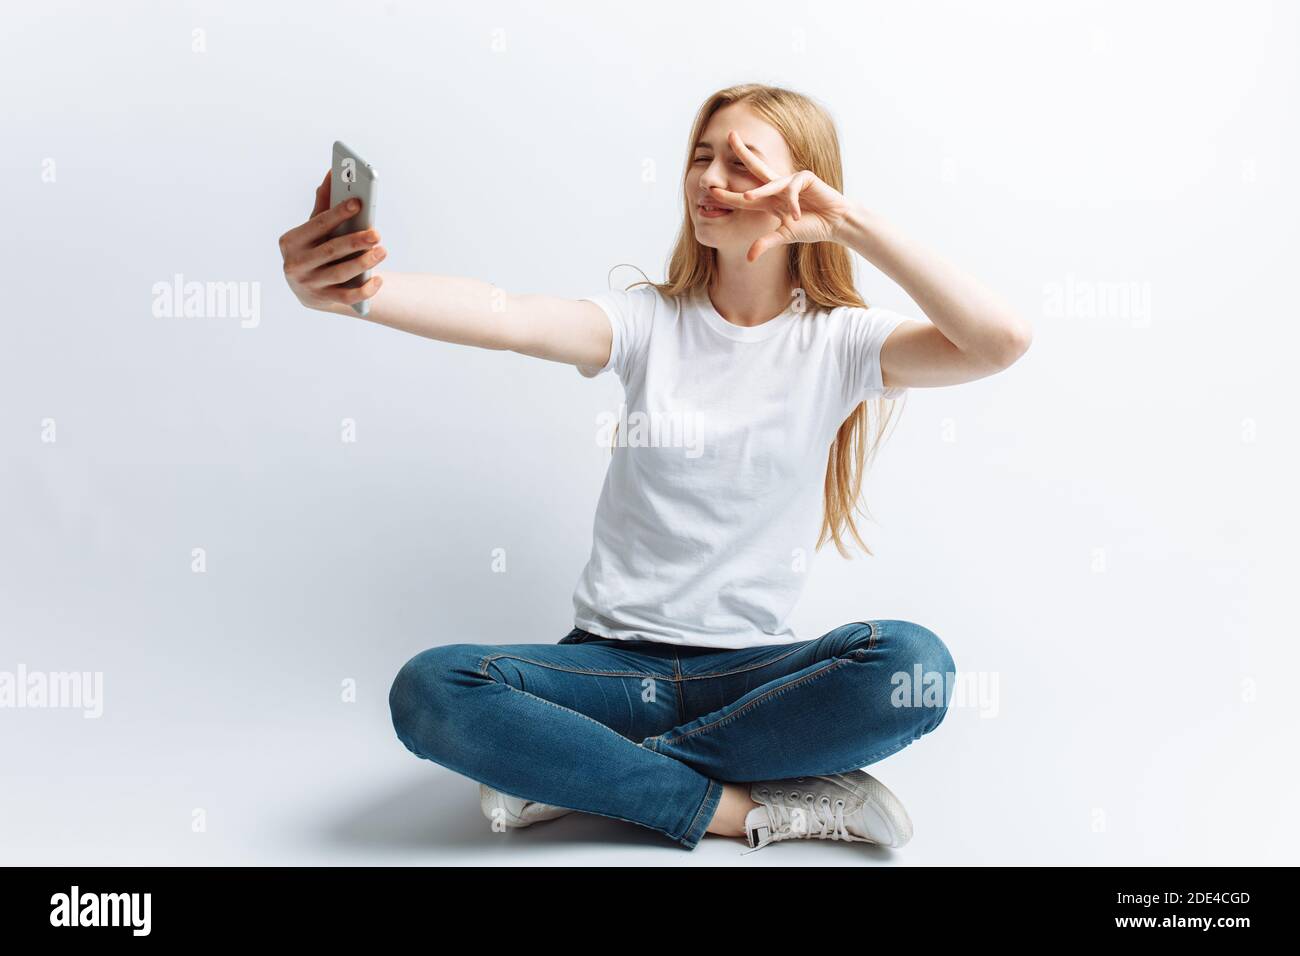 The girl in the Studio doing a selfie, white background Stock Photo